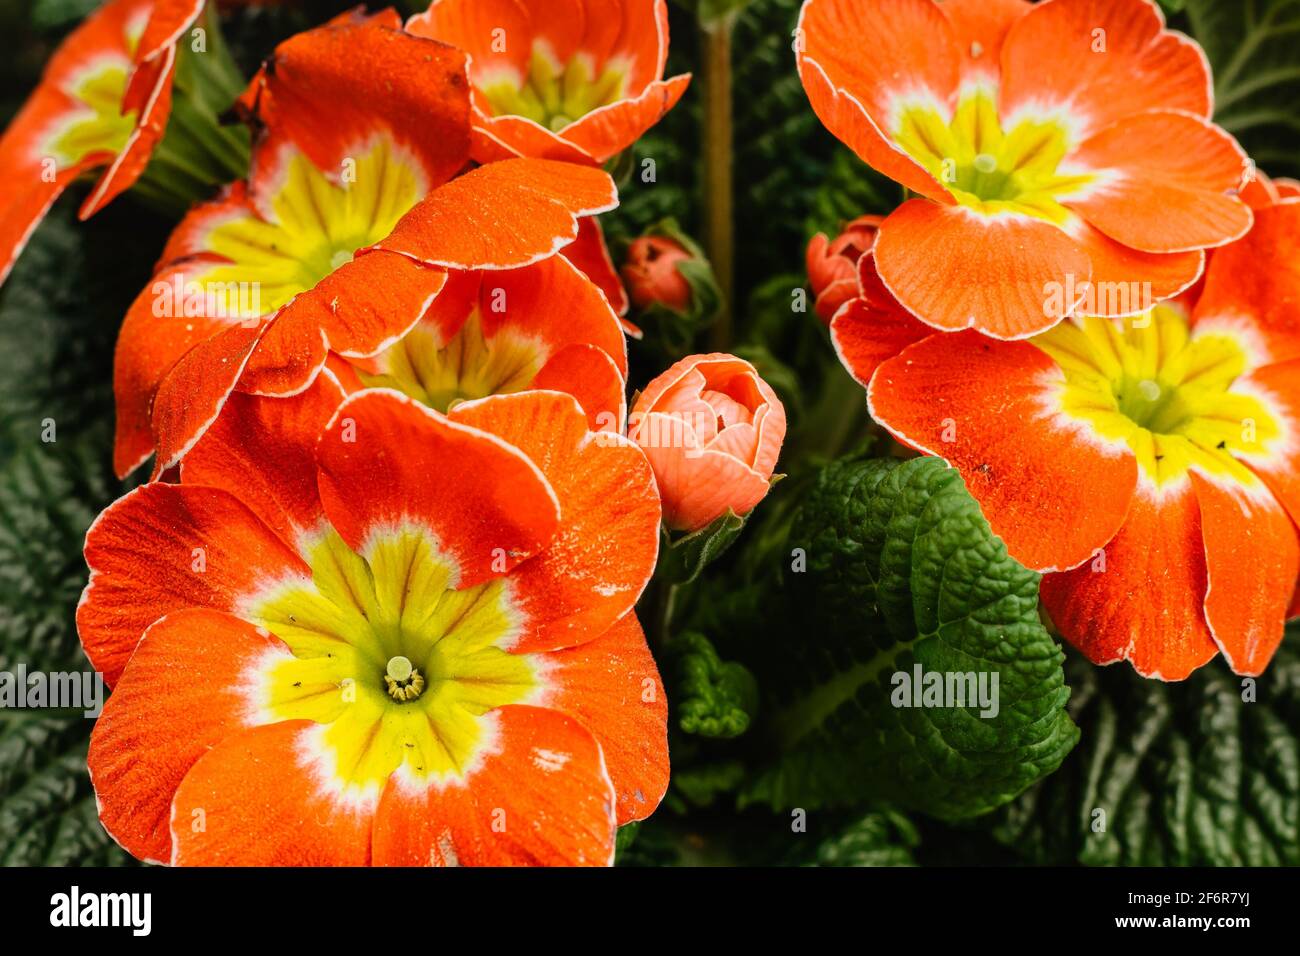 Multicolor Garden Primula Flowers top view. Primrose Primula Vulgaris blossom. Plants in spring garden. Blooming colorful flowers.Happy Easter floral Stock Photo